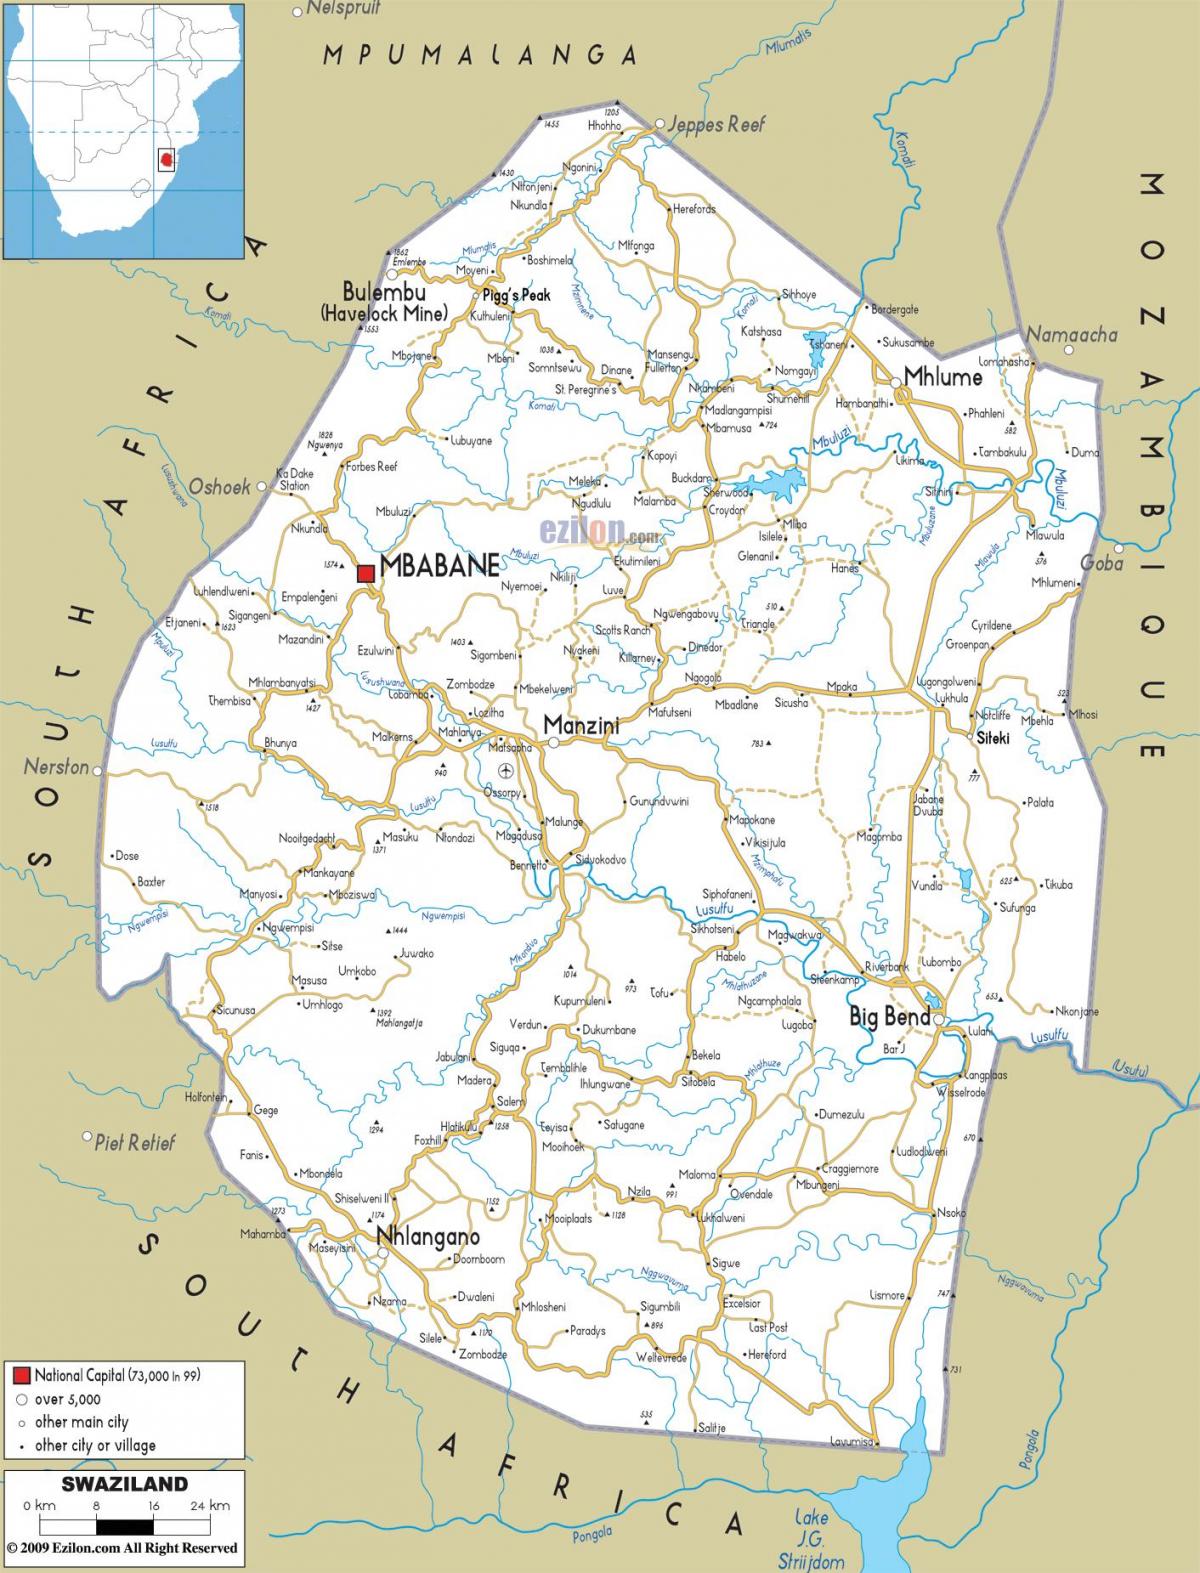 the map of Swaziland